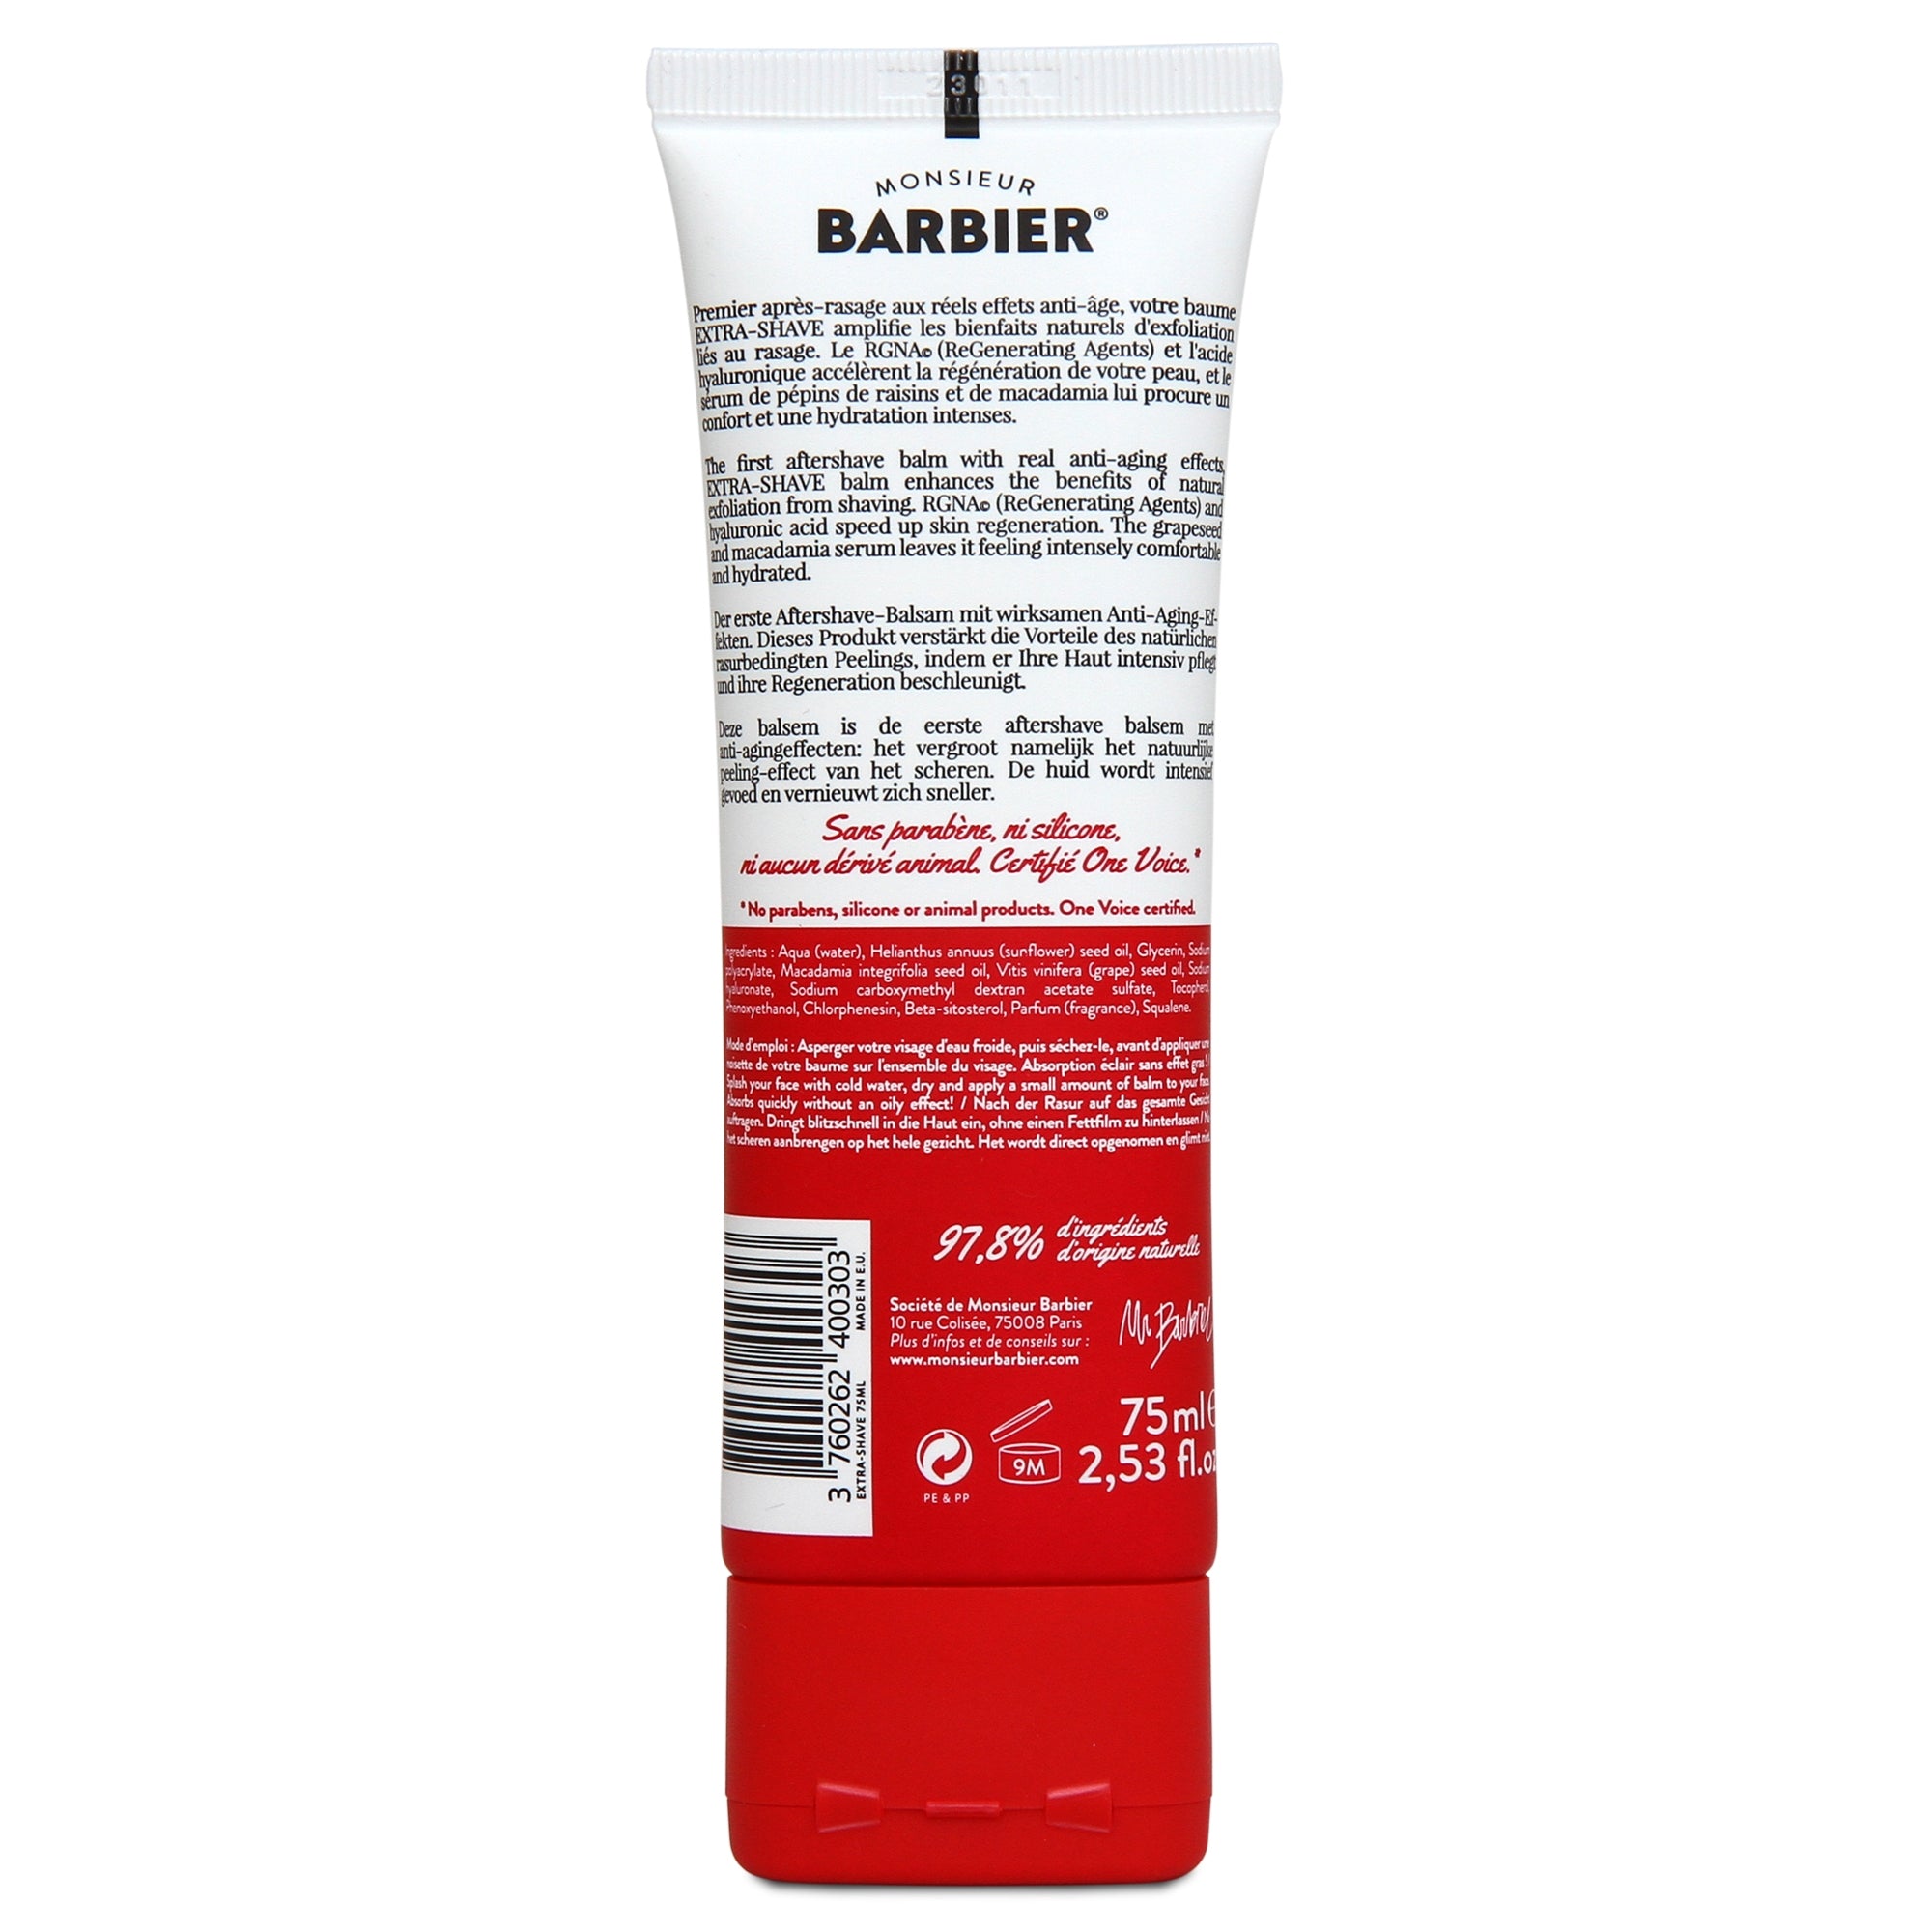 Monsieur BARBIER Extra-Shave, Anti-Aging After-Shave Balm